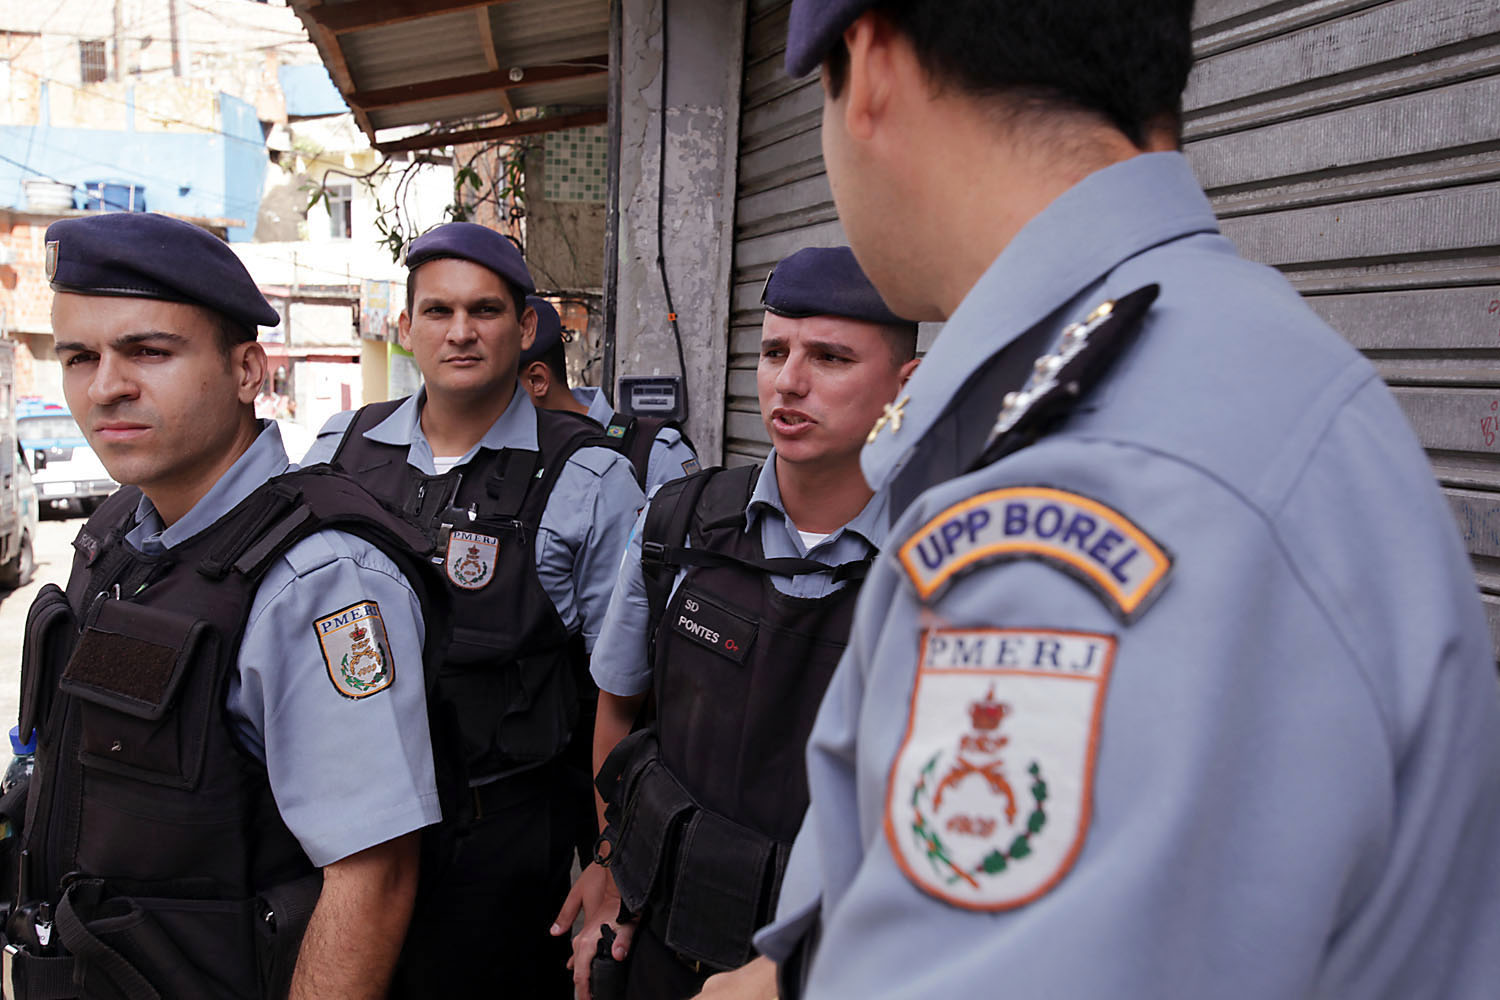 Most UPP officers are new recruits, and have not been brought up in the traditional methods of policing in Rio.